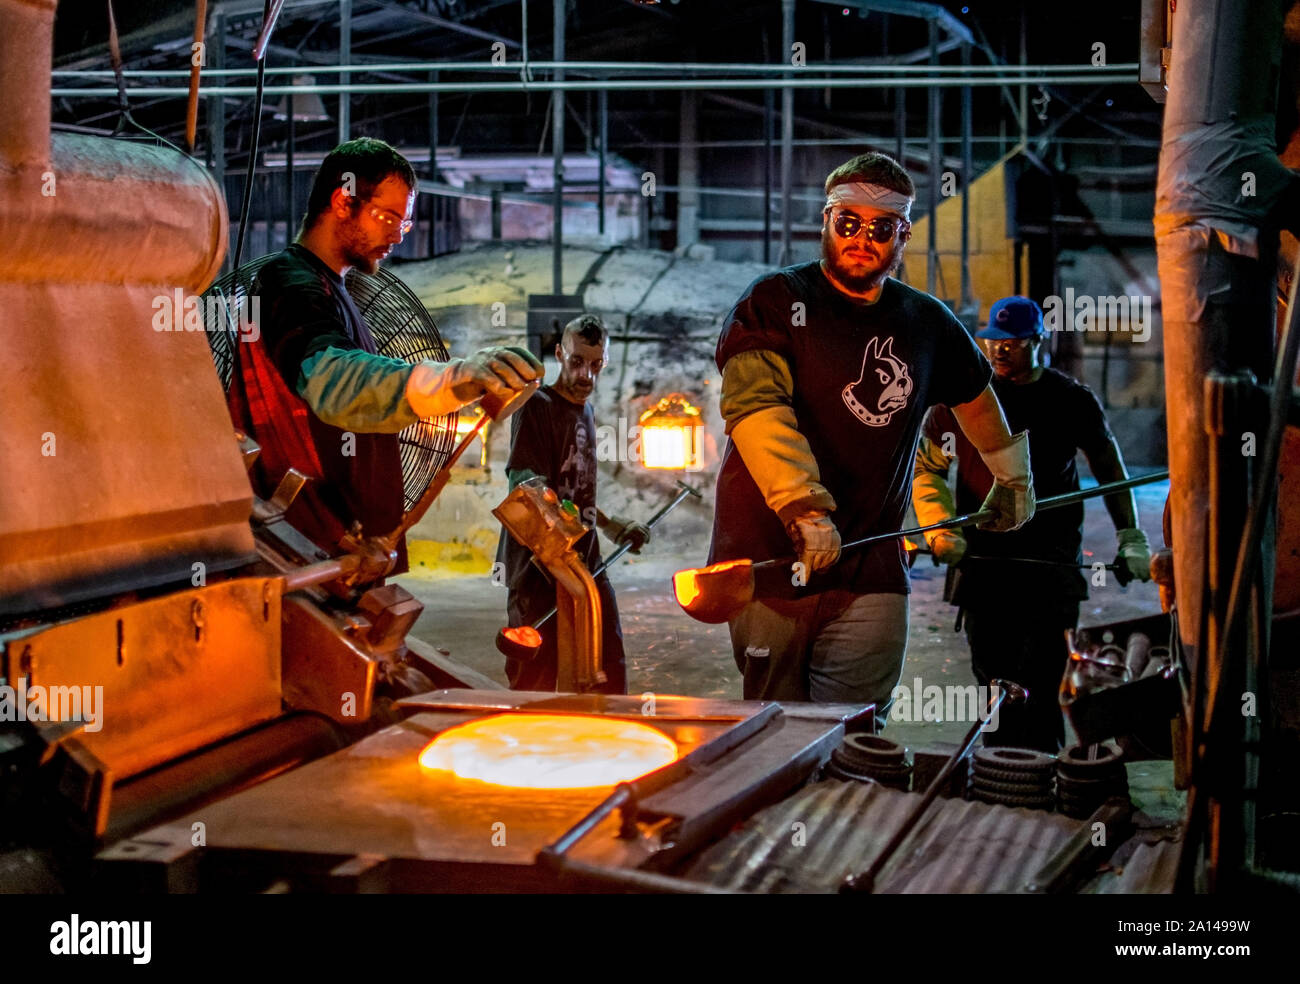 Sept 27 2019 Kokomo Indiana USA; workers at a North American glass factory, carry crucible ladles of melted glass. they then dump it onto a metal shee Stock Photo